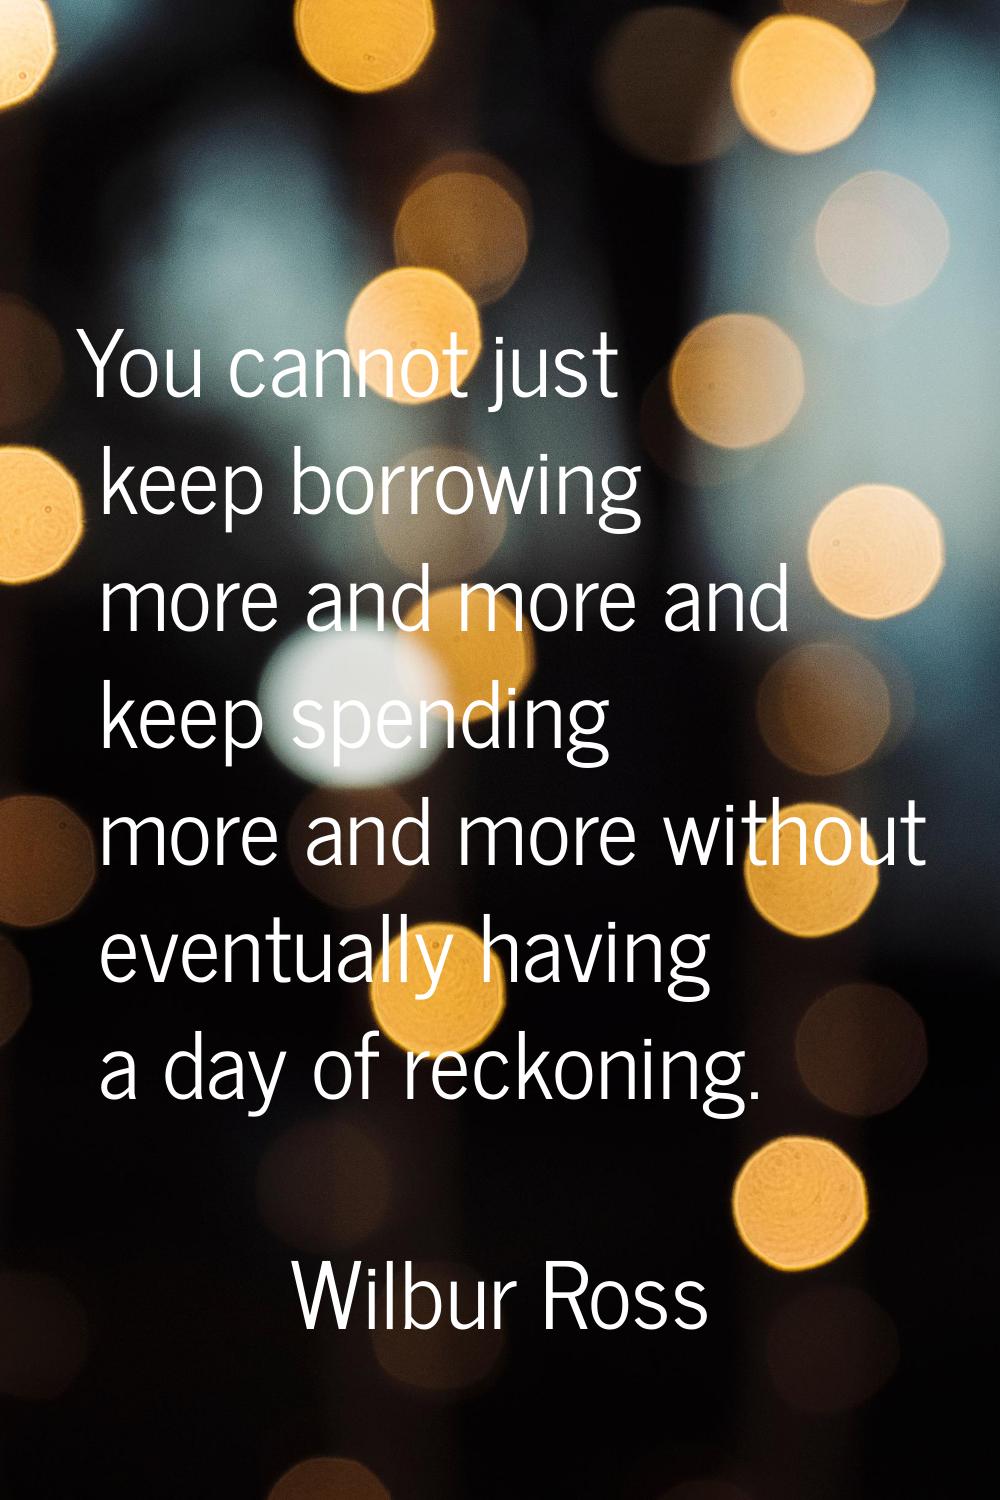 You cannot just keep borrowing more and more and keep spending more and more without eventually hav